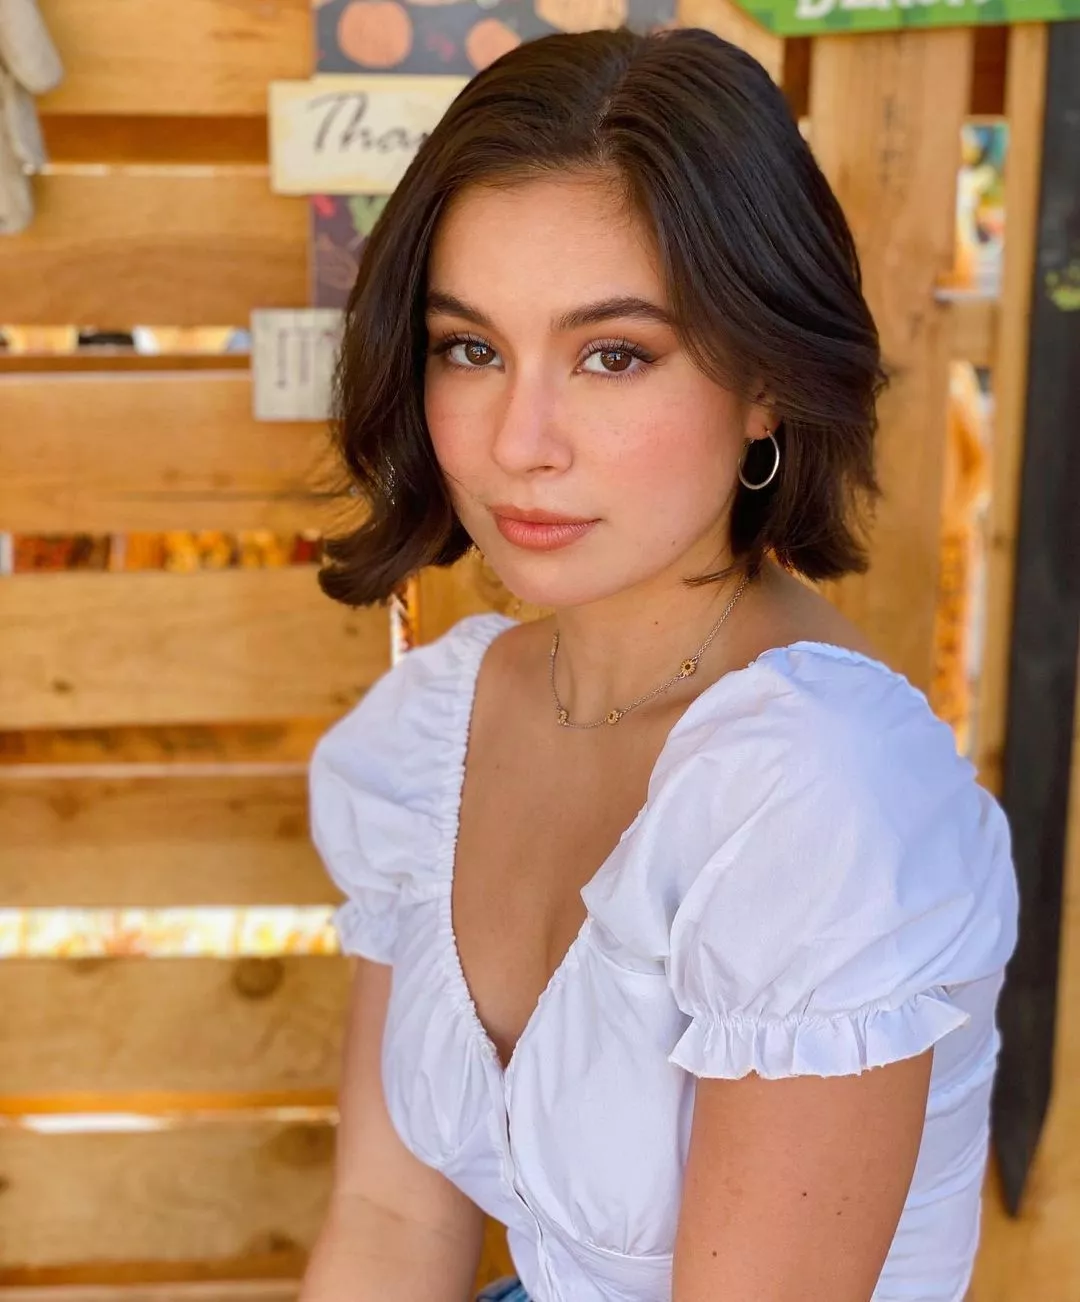 madalyn horcher doom patrol, jack reacher, movies, tv shows, web series, youtube, wiki, bio, sister, brother, father, mother, birthplace, ethnicity, nationality